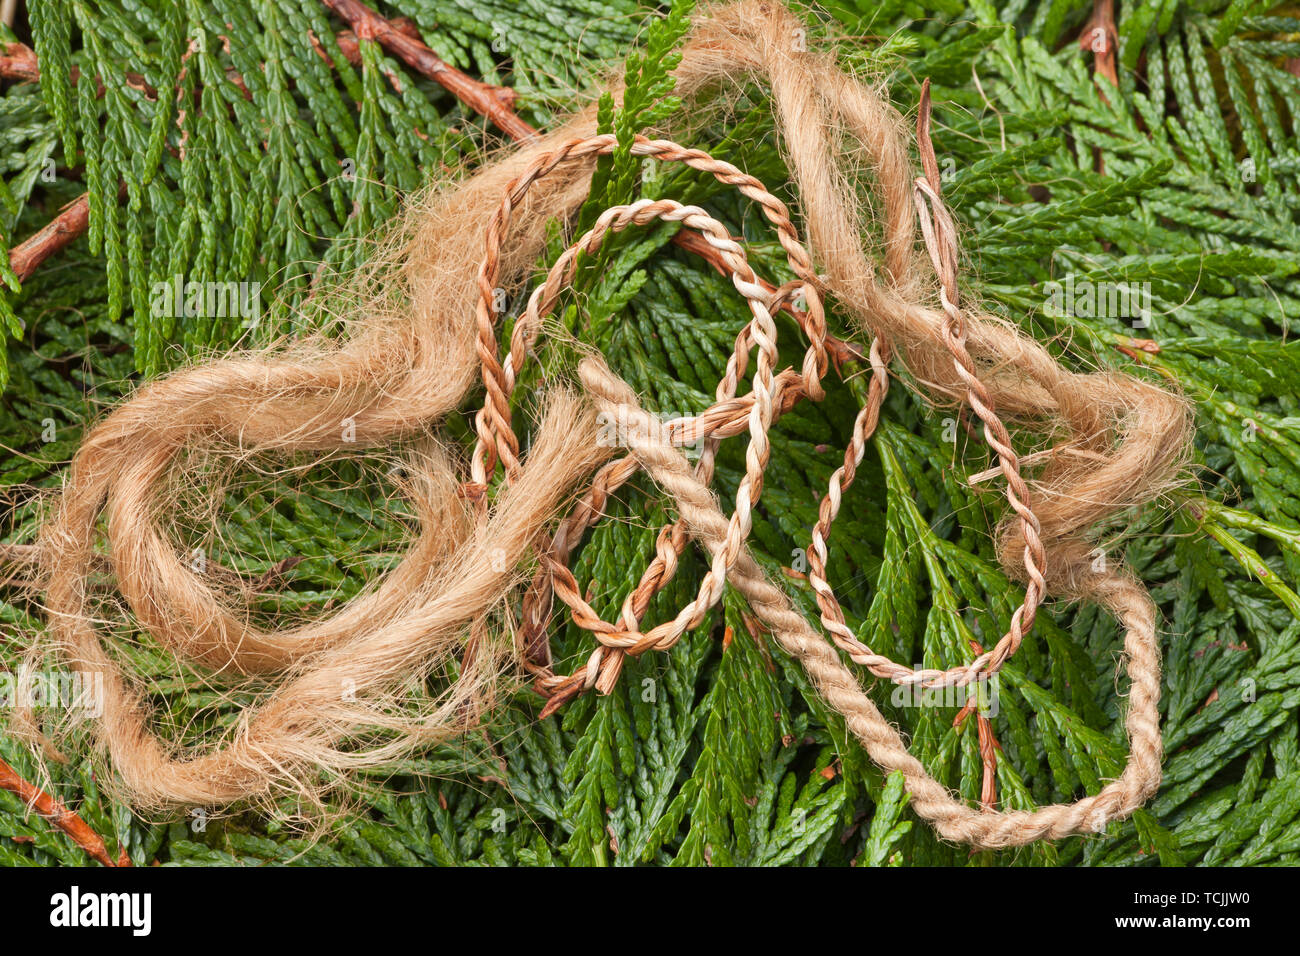 Handmade cordage / twine from the inner bark of a Western Red Cedar tree, lying on Western Red Cedar branchlets. Stock Photo